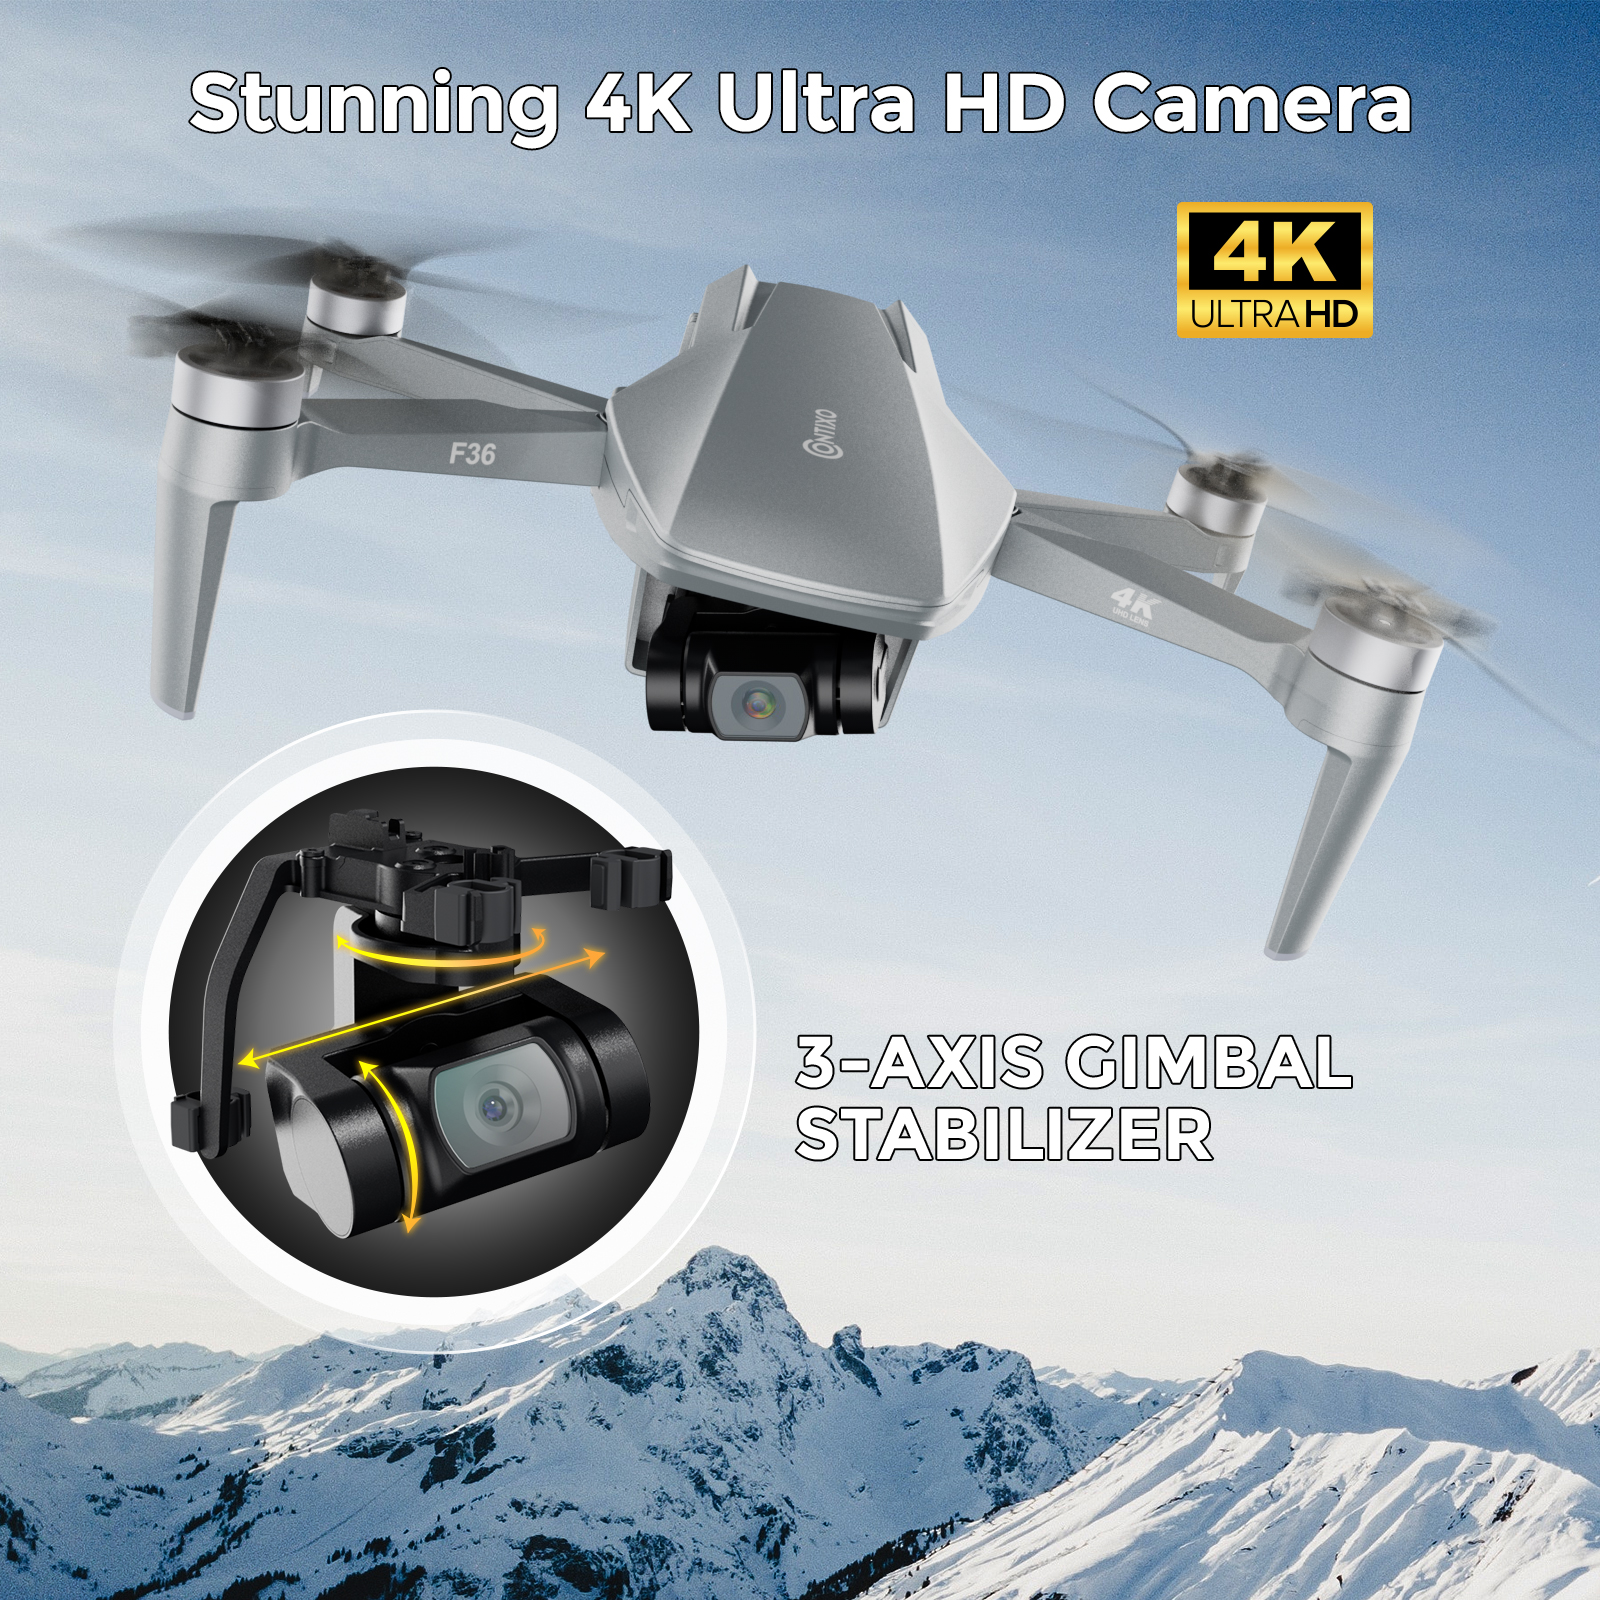 F36 Silver Horizon Foldable GPS Quadcopter Drone with 4K Camera, Brushless Motor, 3-Axis Stabilizing Gimbal, Extended Flight Range Up to 2 Miles, and 25-Minute Flight Time - image 4 of 10